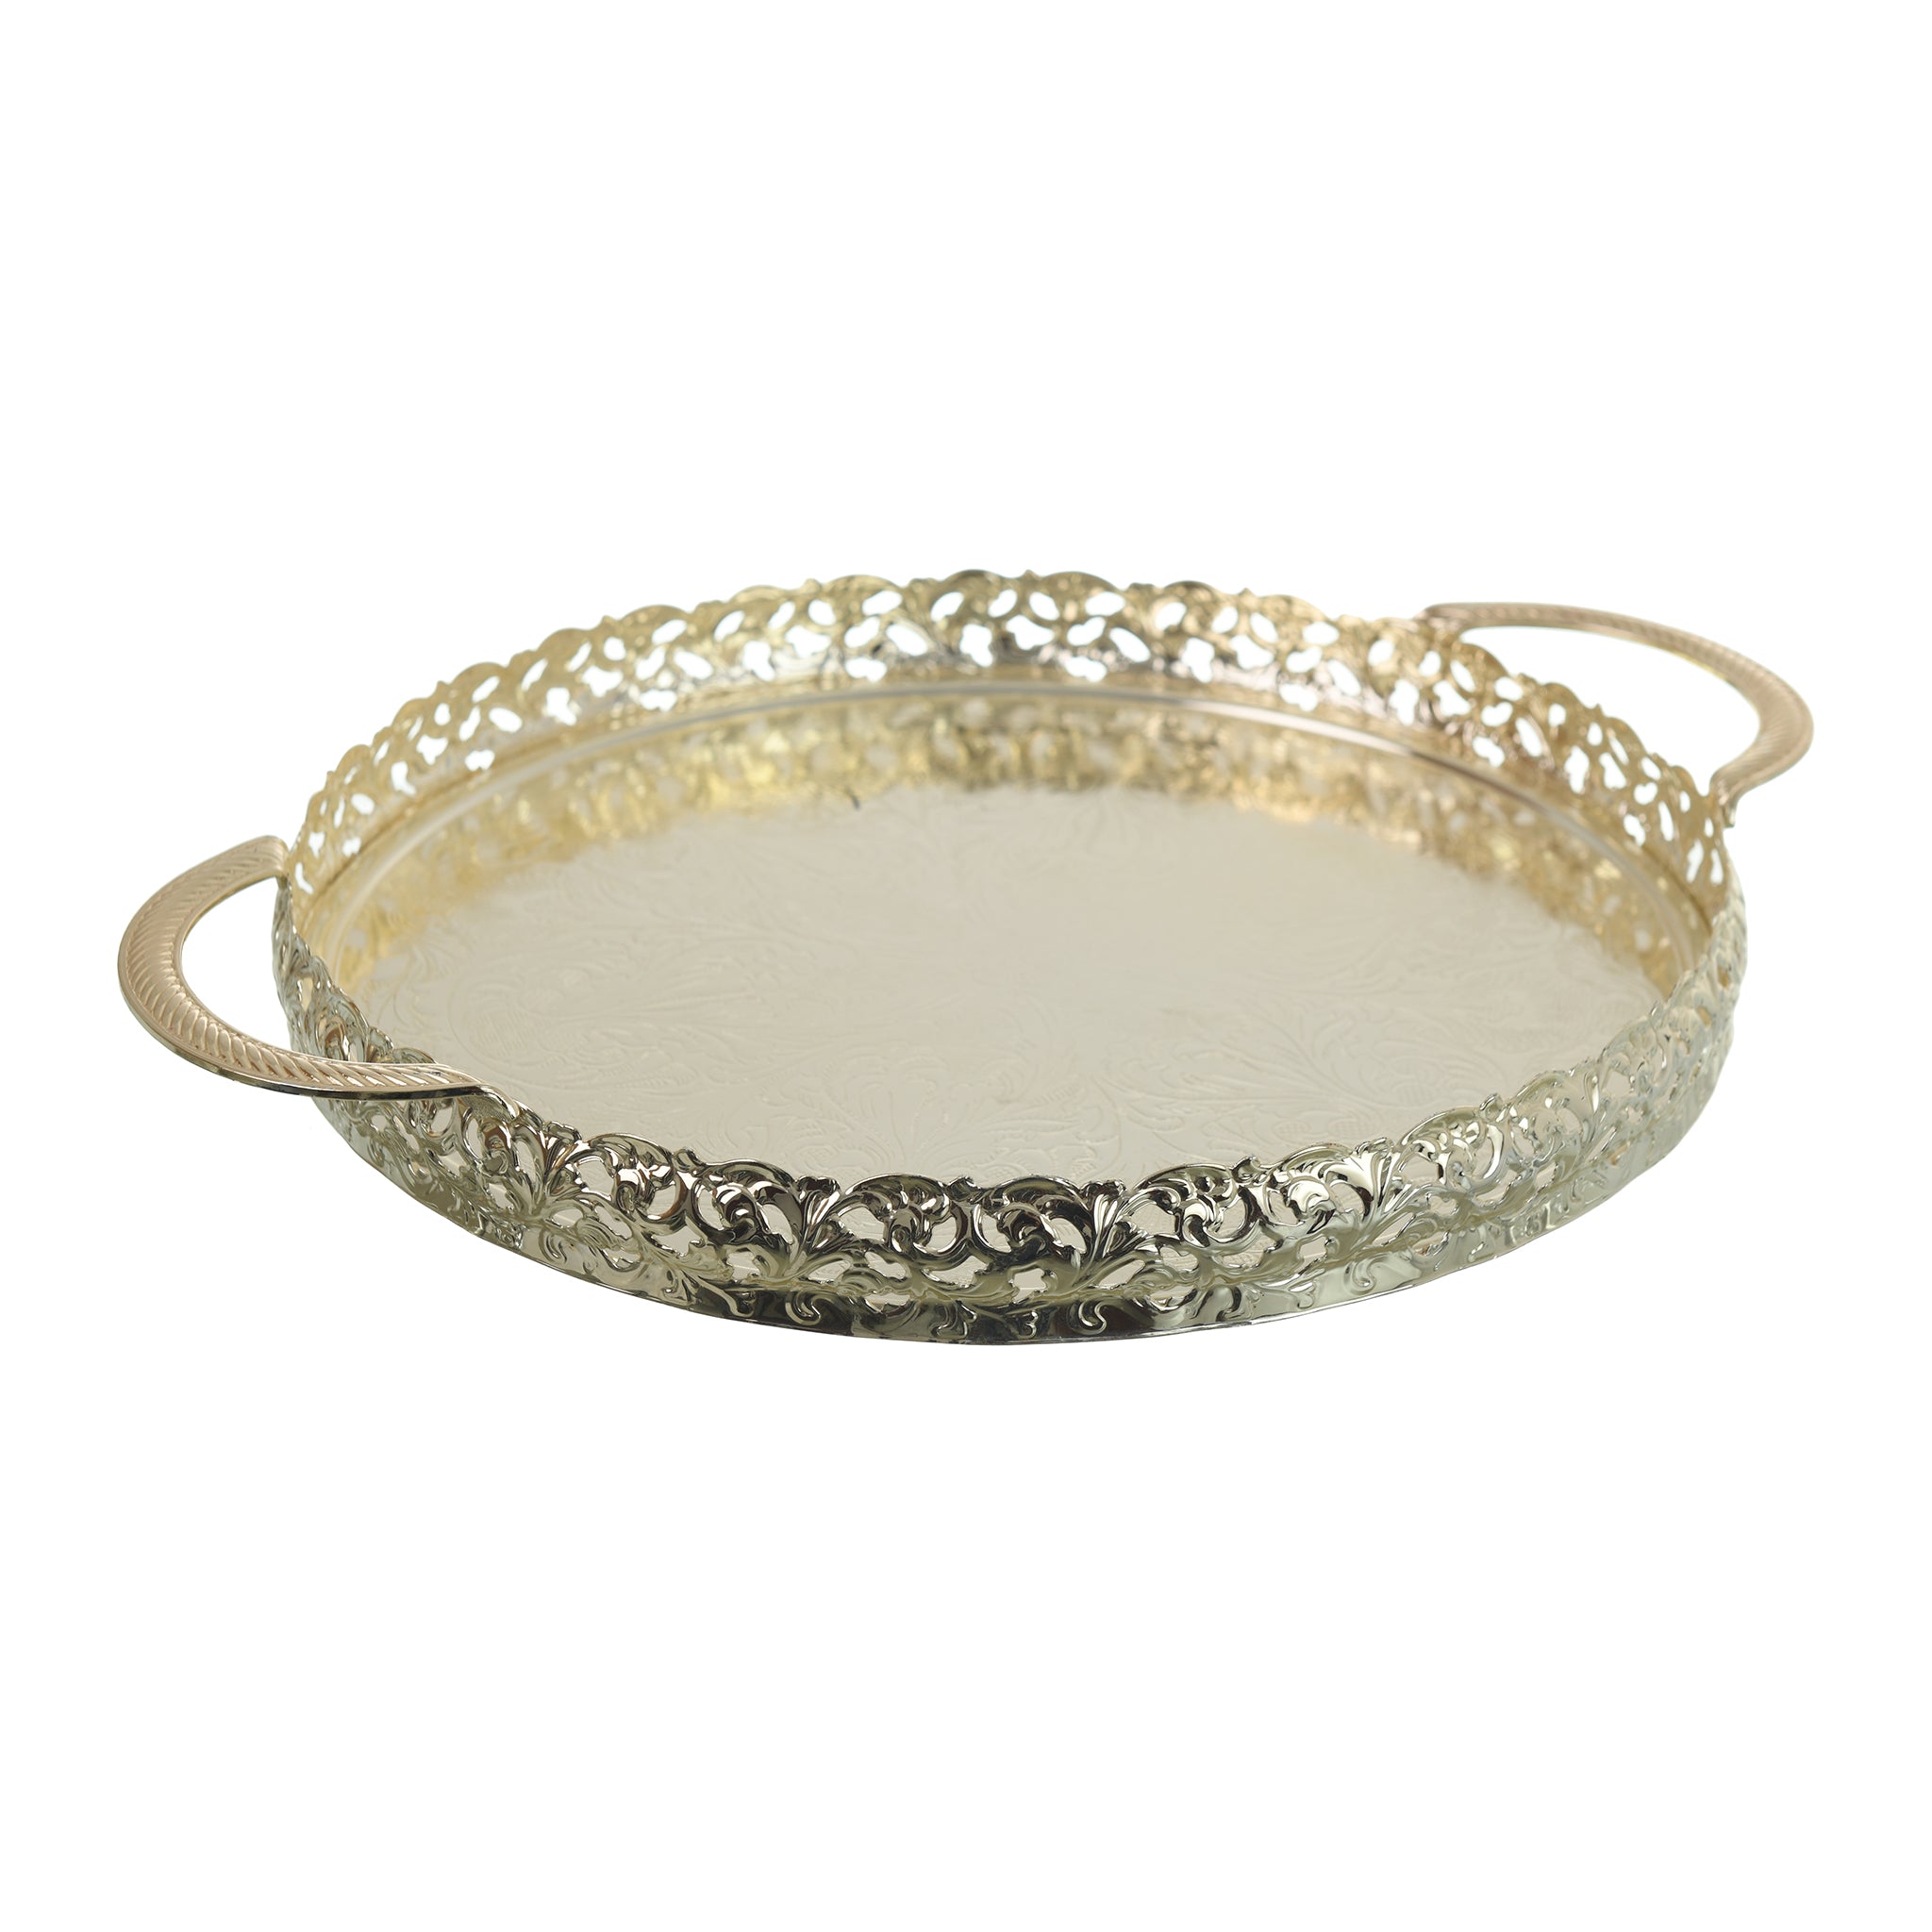 Queen Anne - Round Tray With Handles - 28cm - Silver Plated Metal - 26000433